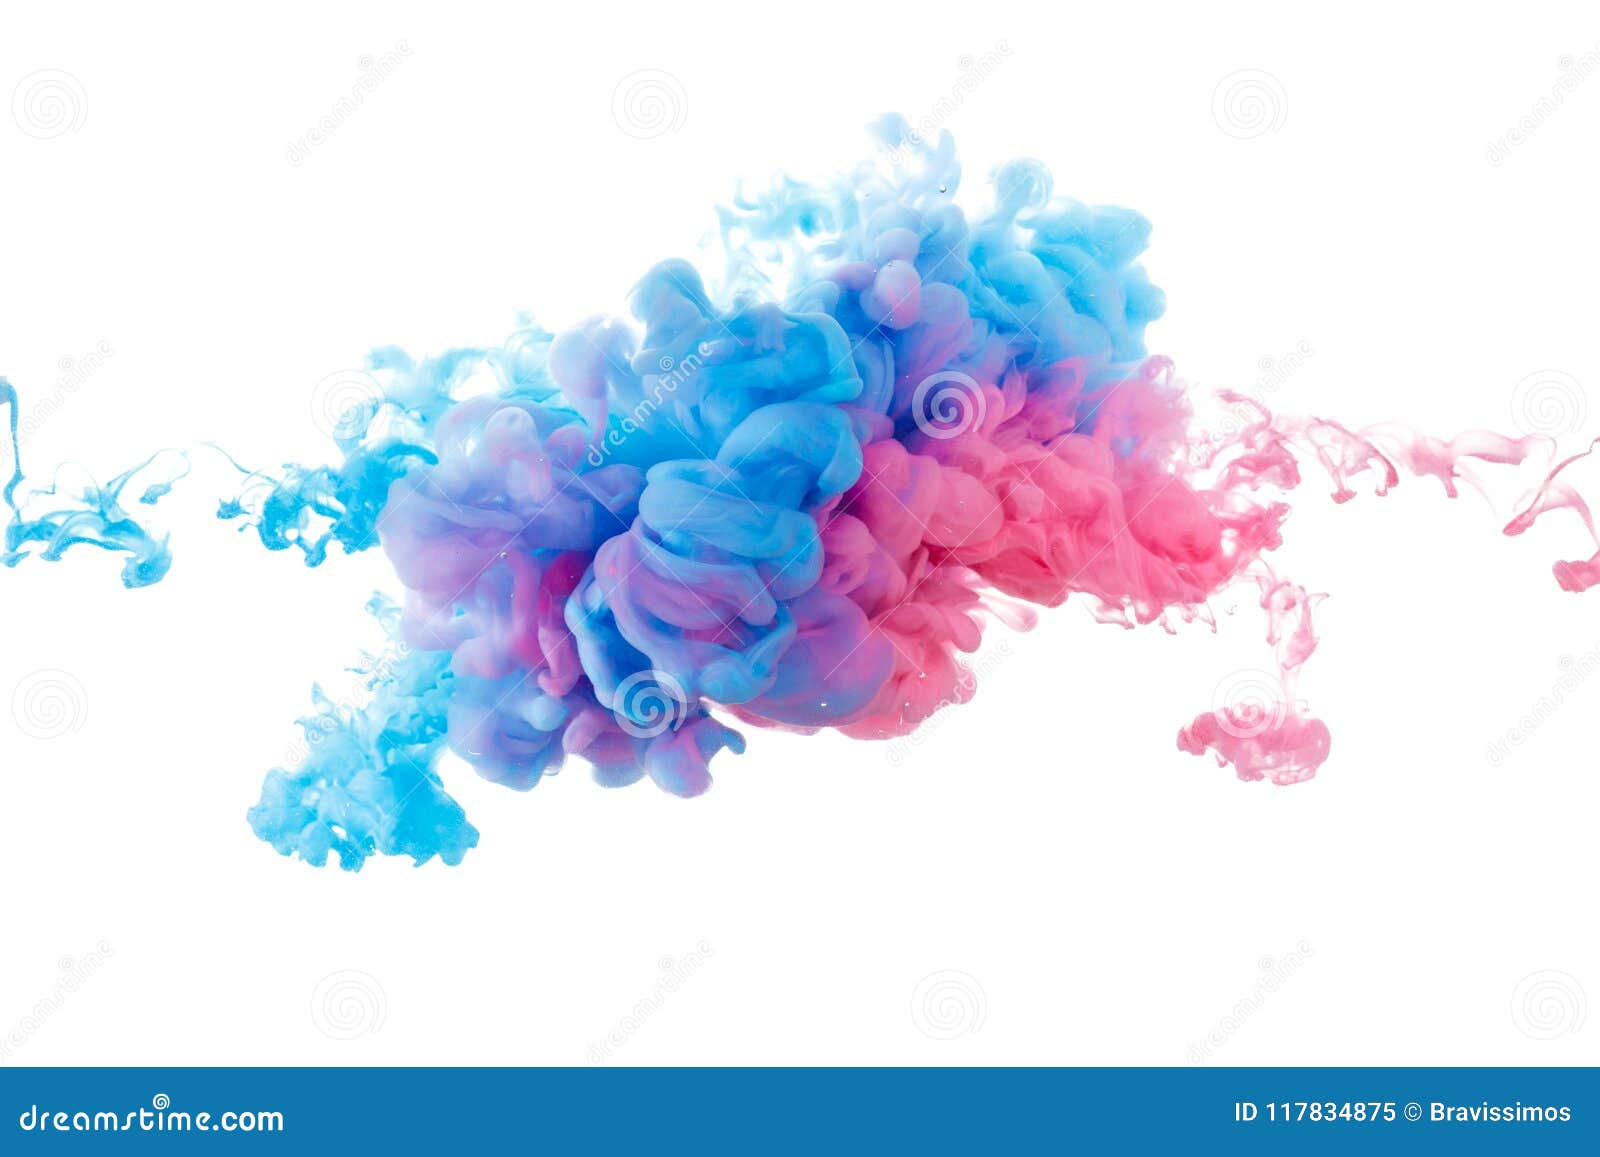 Blue and Red Paint Splash Isolated on White Background Stock Image ...